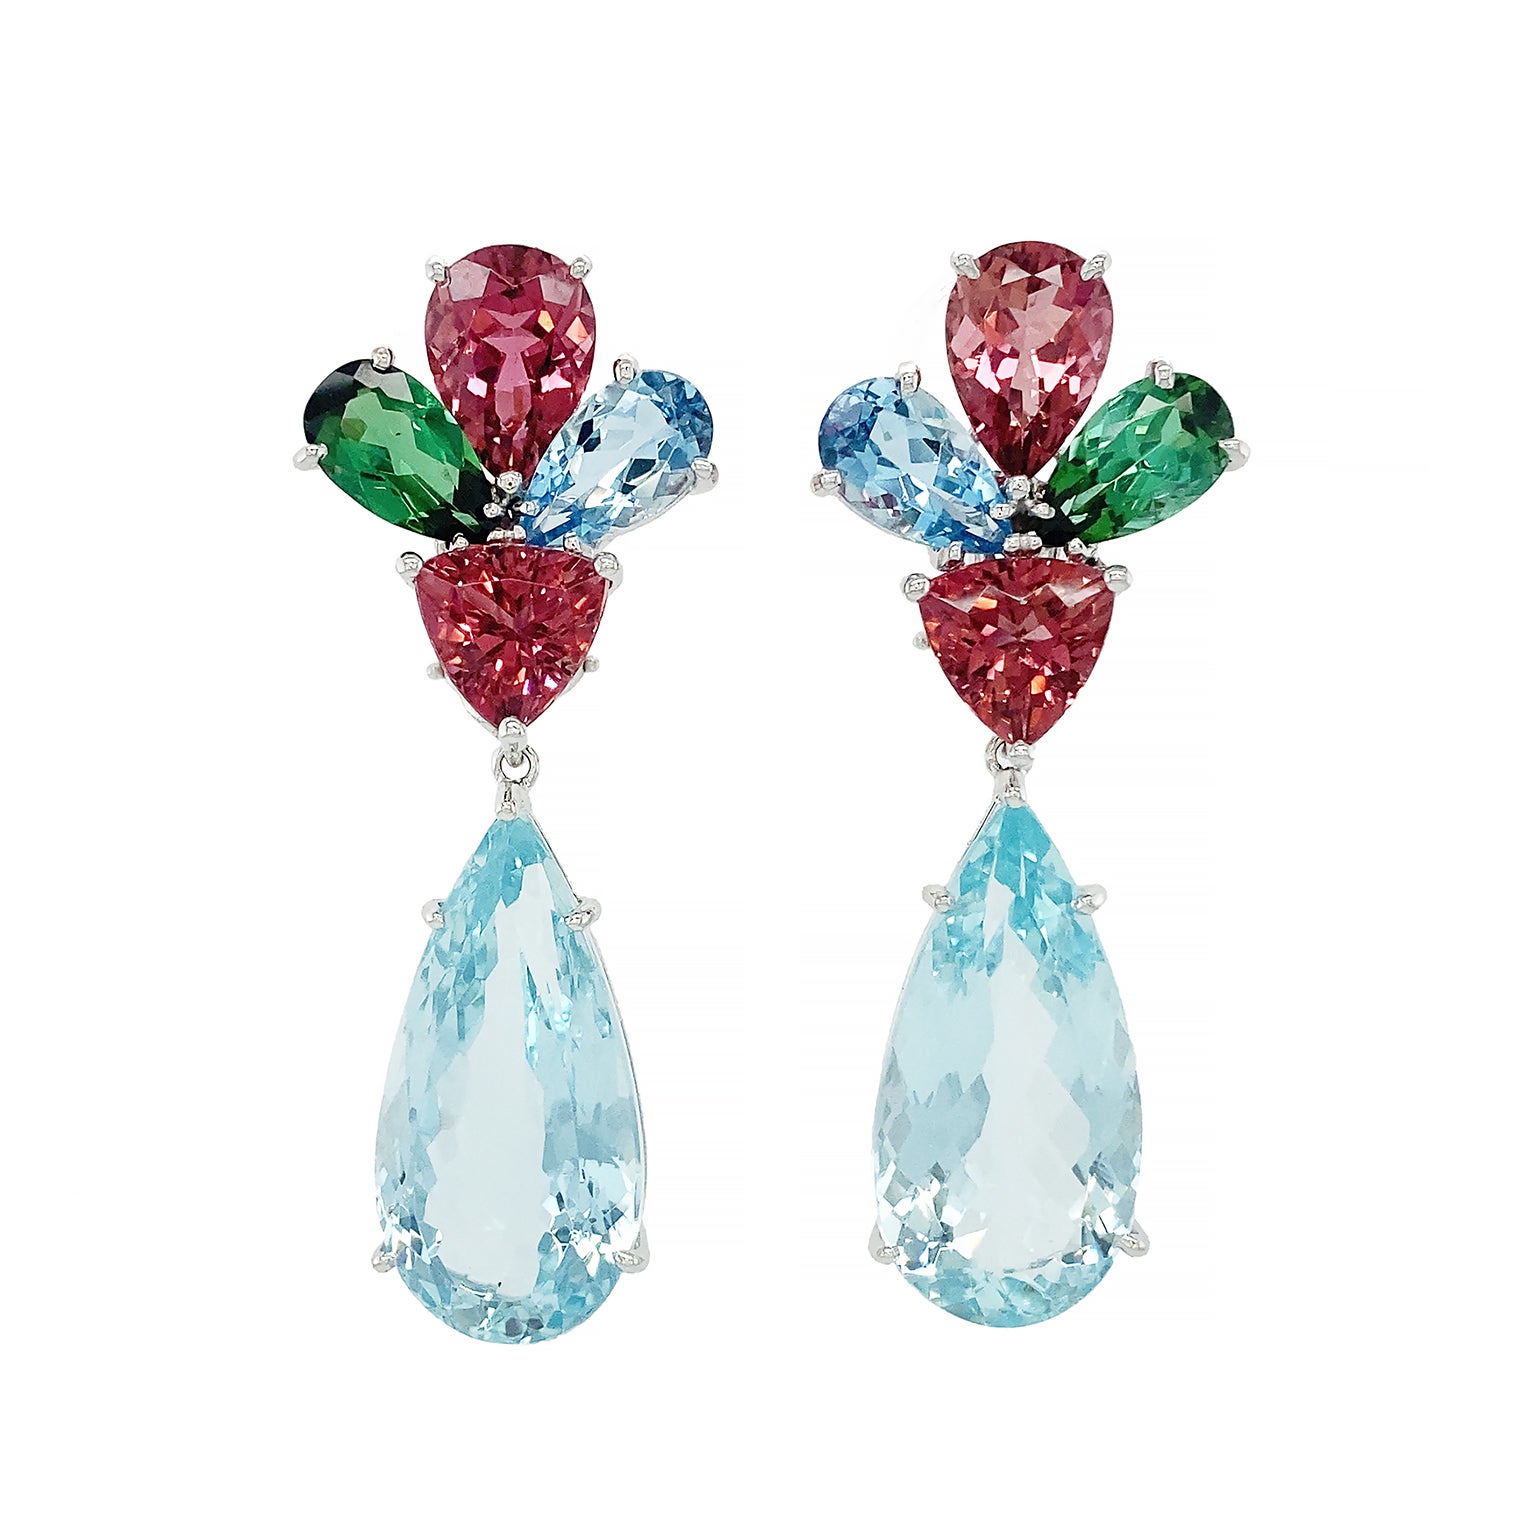 Jewels in primary colors create a vivacious trio. The design begins with three pear shaped cuts of rubellite, green tourmaline and aquamarine. Their broadest ends face outward as their points lead the eye to a trilliant cut of fiery rubellite.